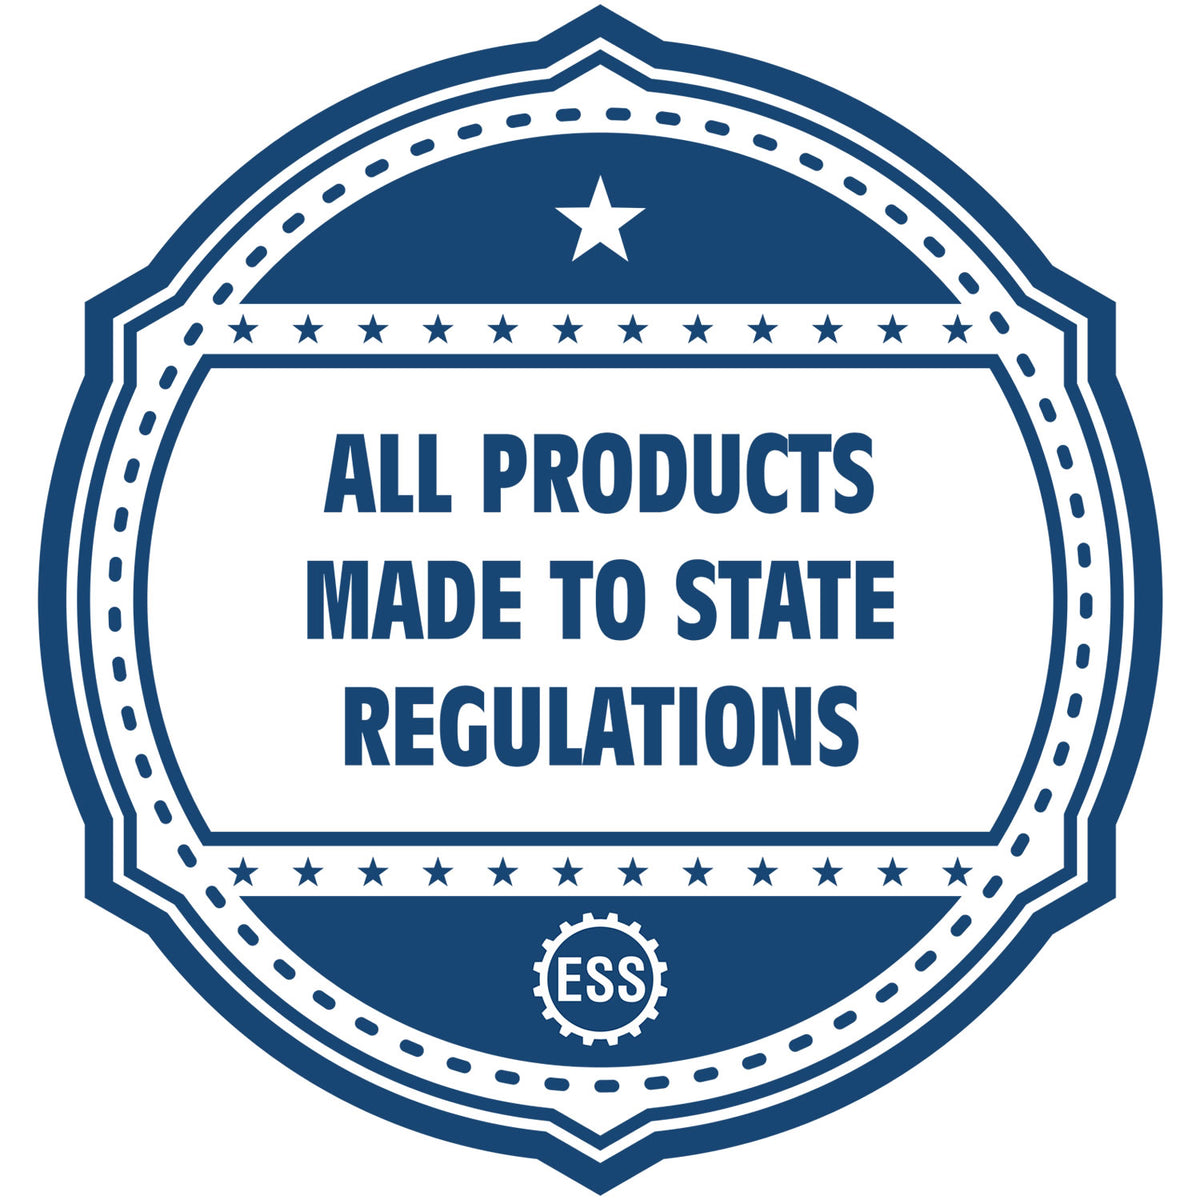 An icon or badge element for the State of Virginia Long Reach Architectural Embossing Seal showing that this product is made in compliance with state regulations.